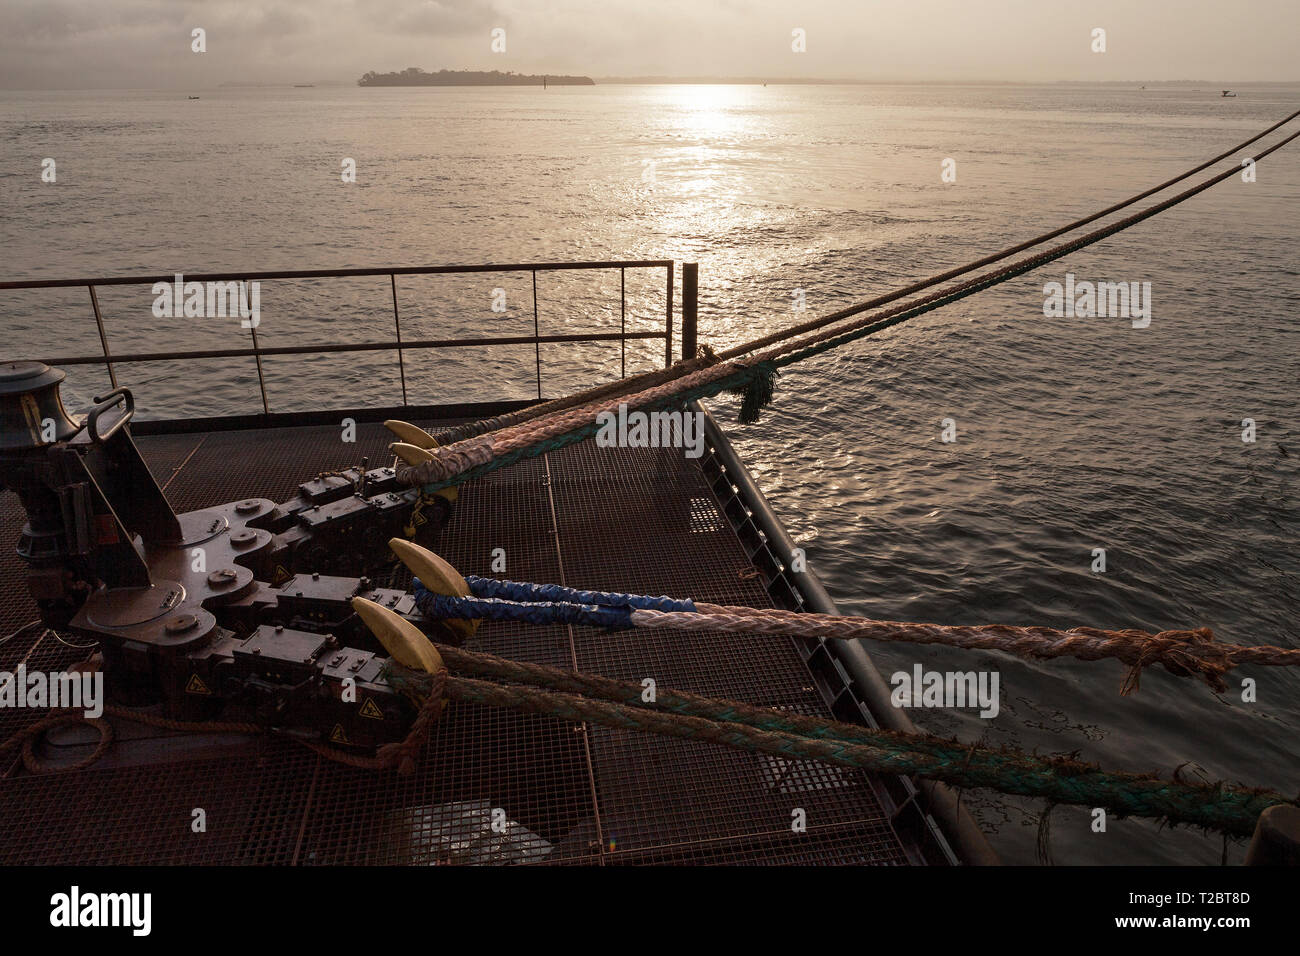 Port operations for managing and transporting iron ore. Sunrise across  Dolphin jetty mooring facility with quick release rope hooks as ship sets sail Stock Photo